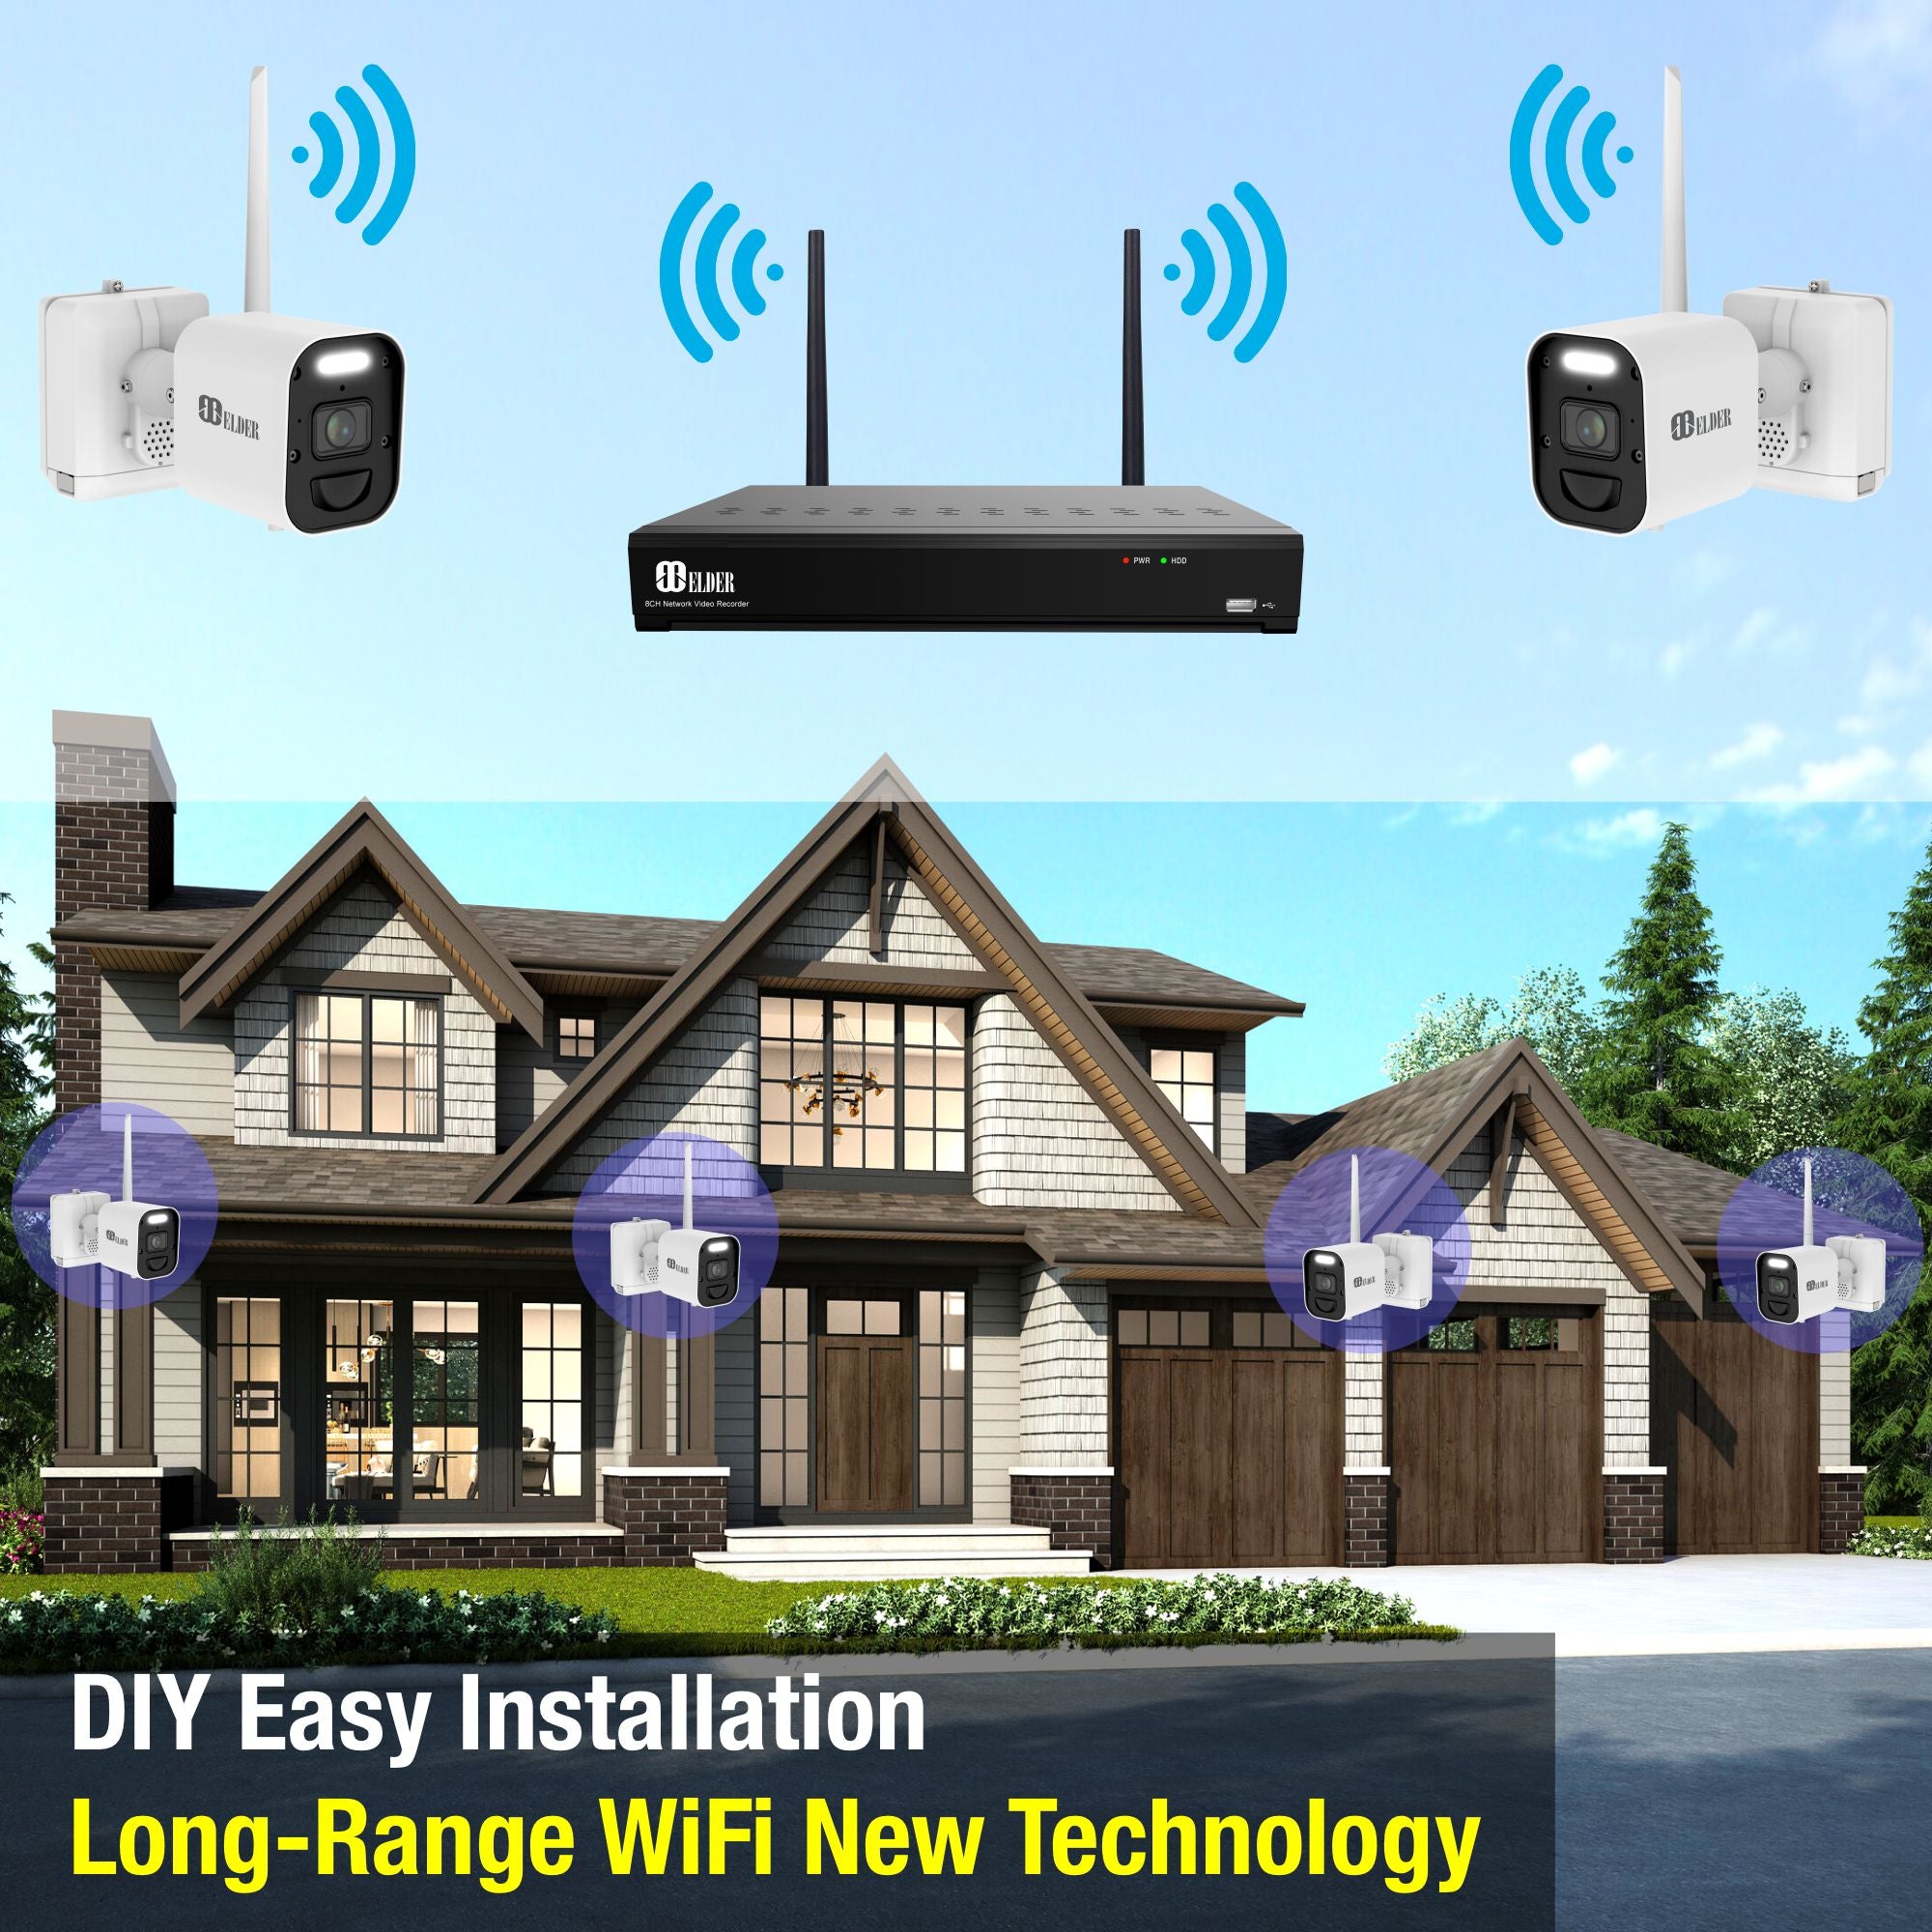 Wireless Surveillance Camera Battery-Powered with WiFi NVR for DIY home security system